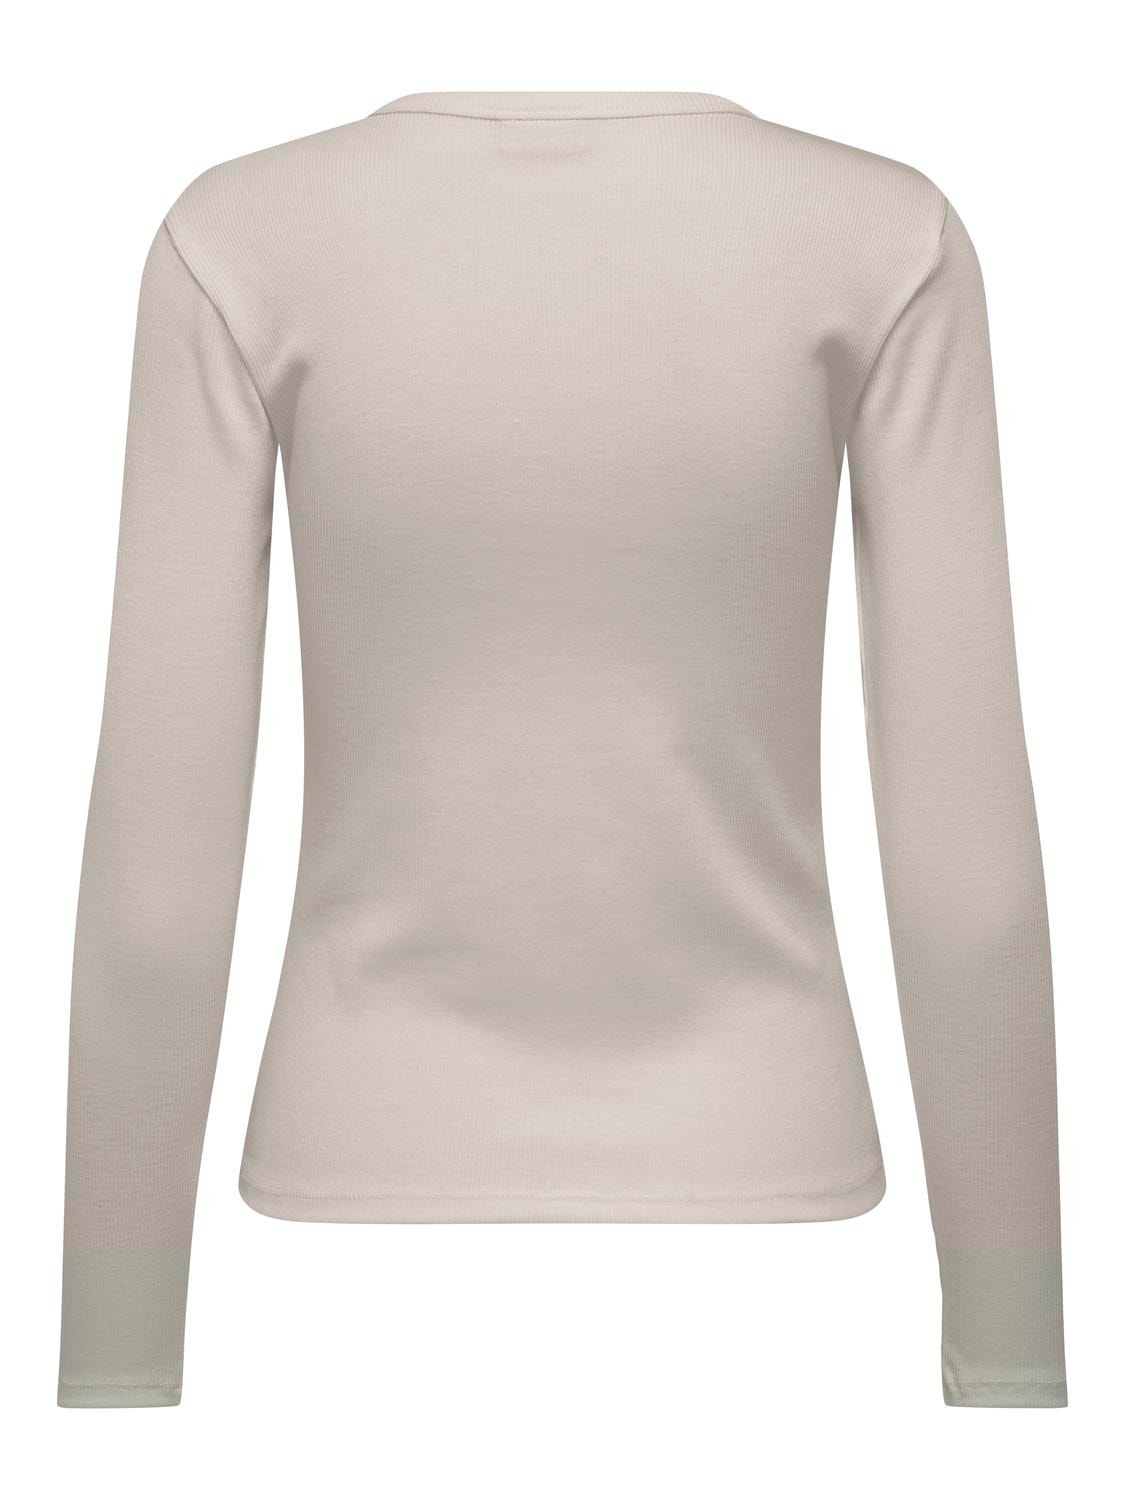 ONLY Regular Fit Round Neck Top -Chateau Gray - 15311088